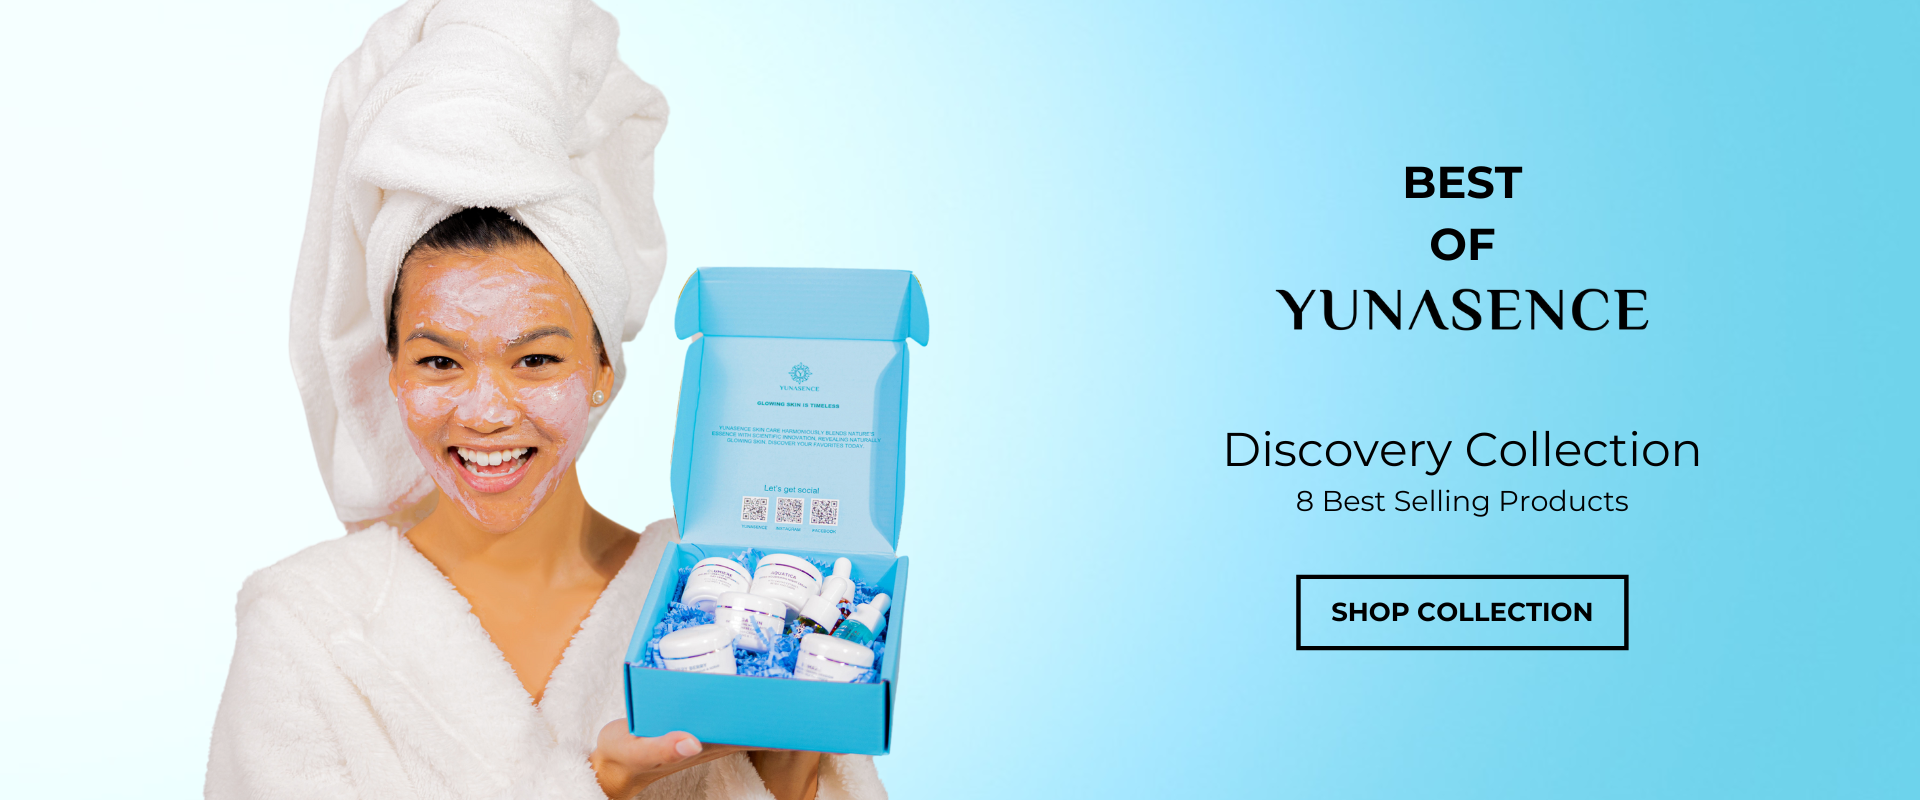 Discover Yunasence skin care 8 best selling products